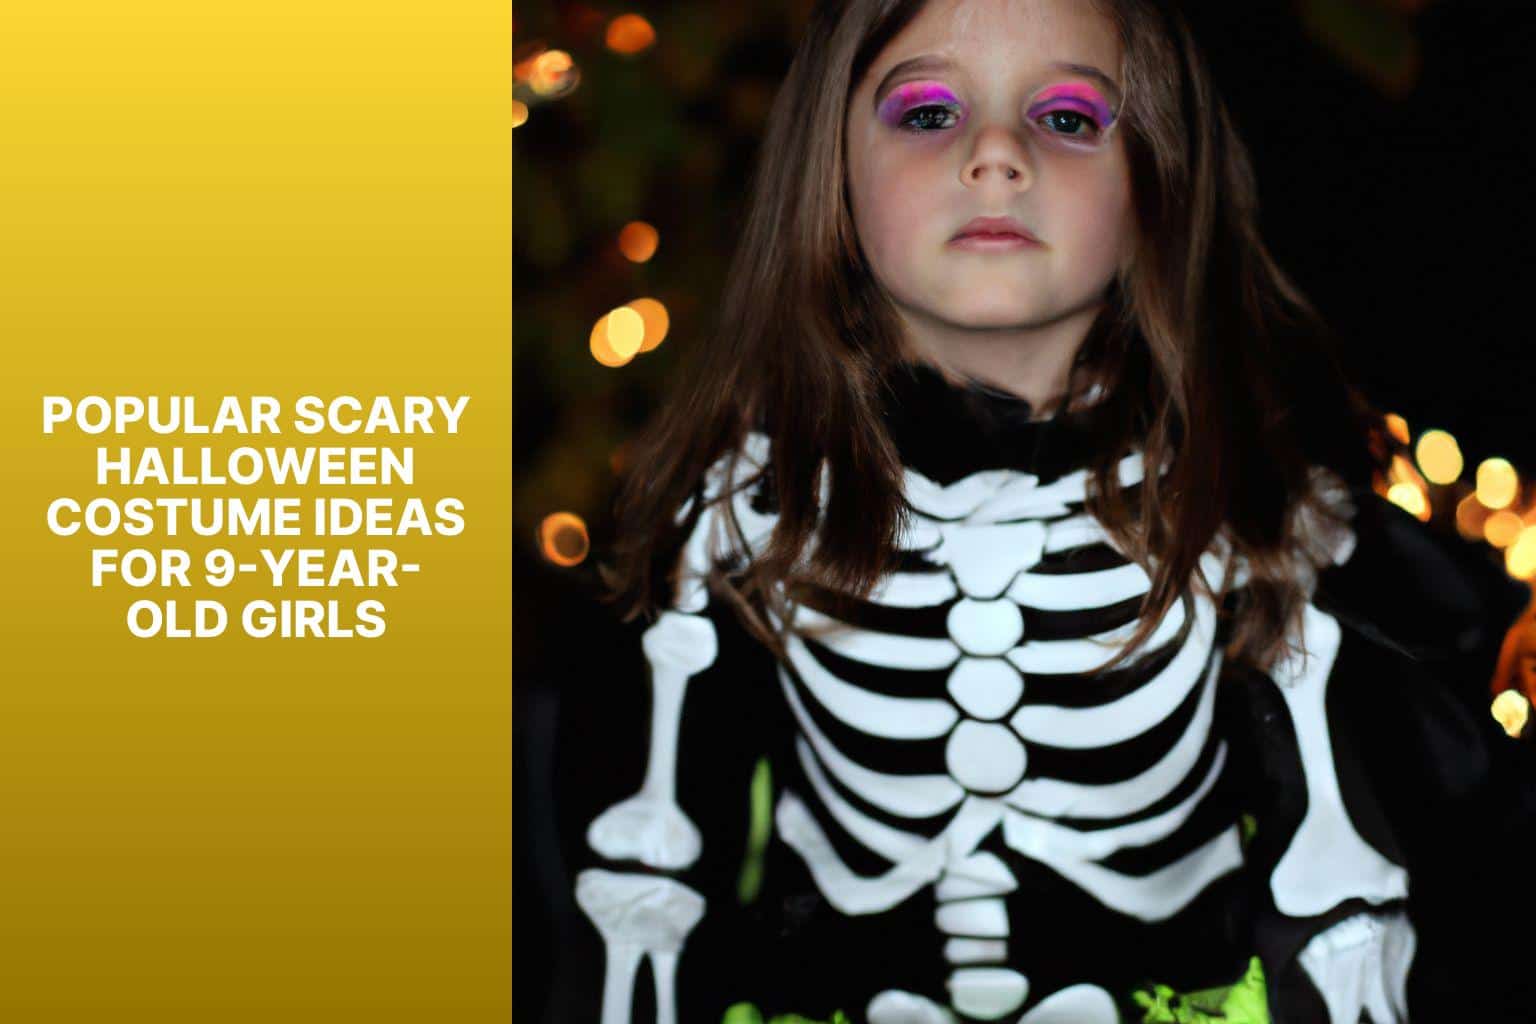 Popular Scary Halloween Costume Ideas for 9-year-old Girls - halloween costumes for 9 year olds girl scary 